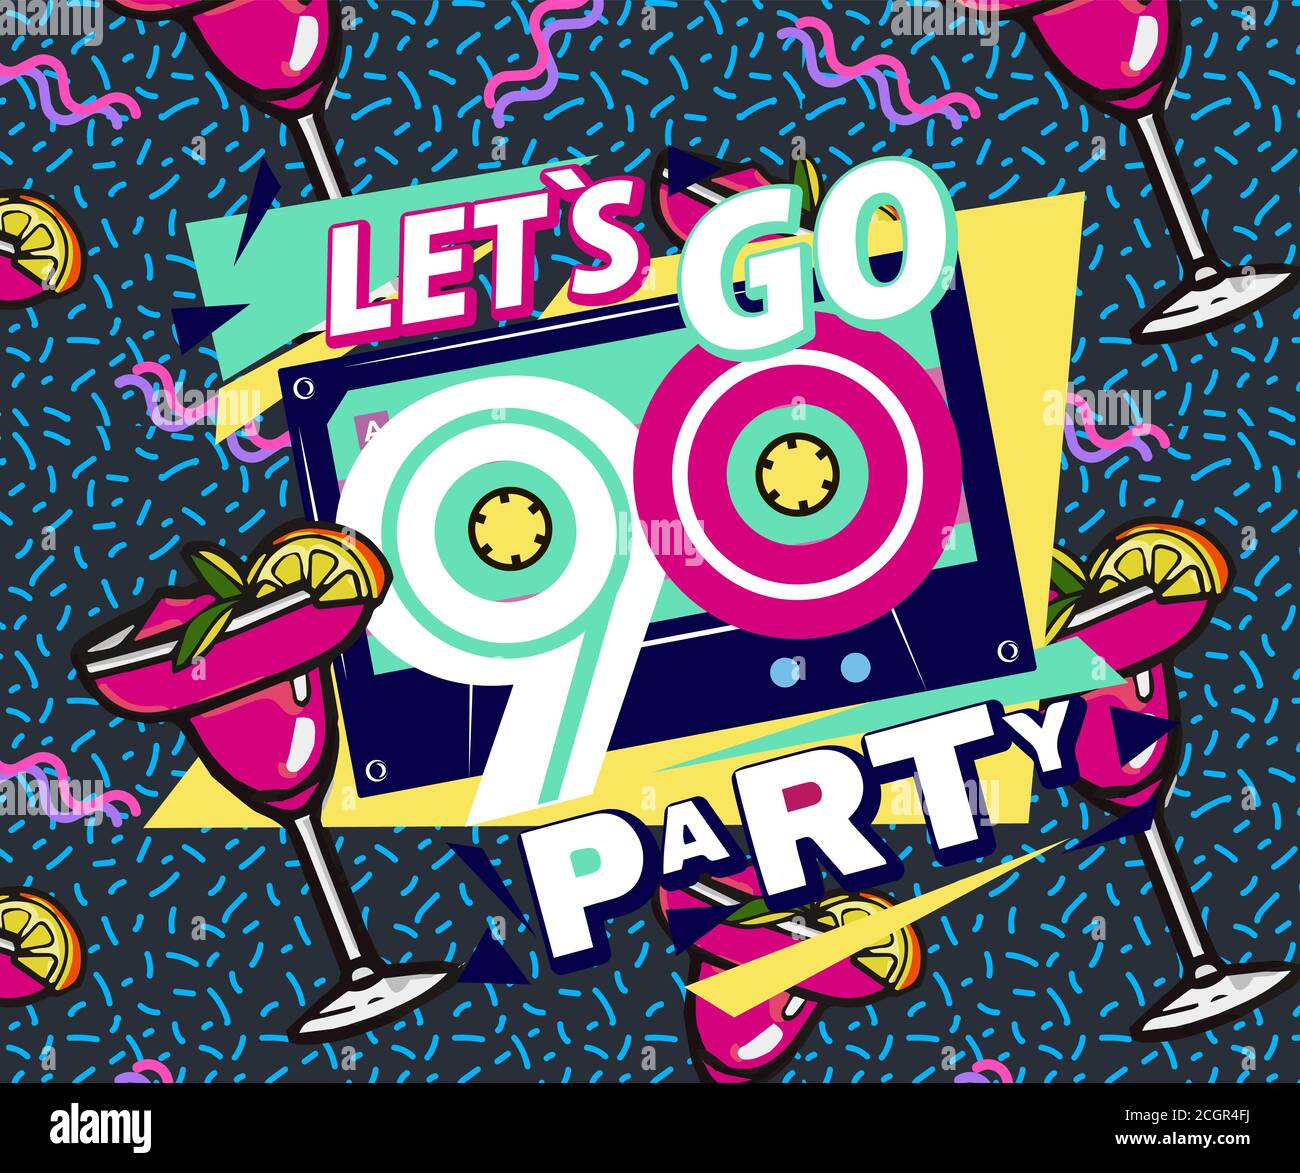 https://c8.alamy.com/comp/2CGR4FJ/retro-80s-90s-party-invitations-retro-style-textures-and-alphabet-mix-aesthetic-fashion-background-and-eighties-graphic-pop-and-rock-music-party-eve-2CGR4FJ.jpg